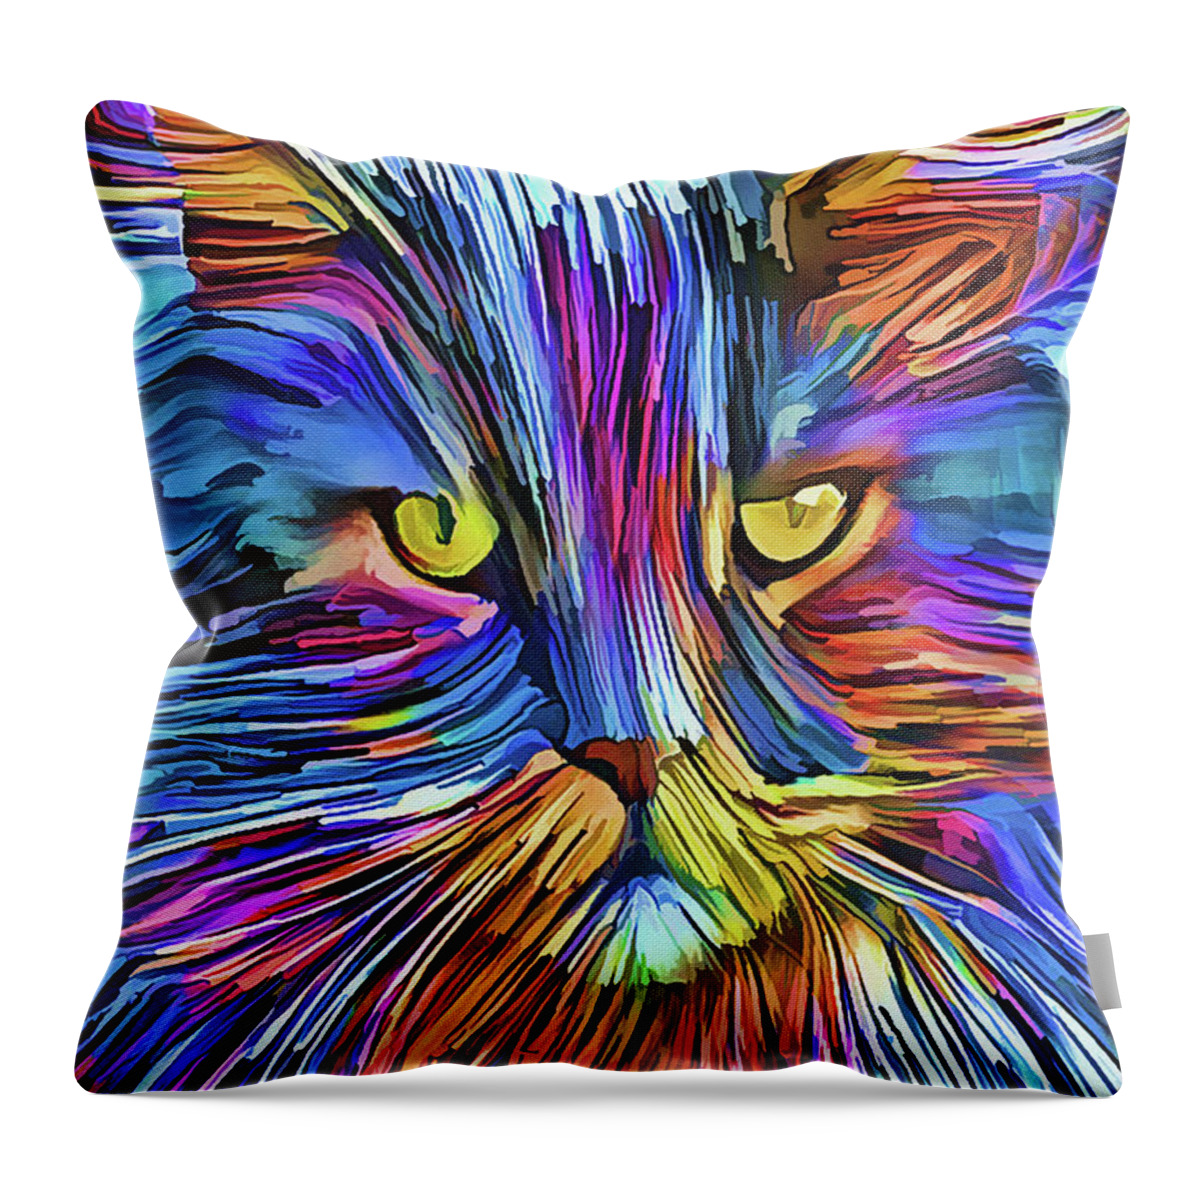 Cat Throw Pillow featuring the photograph The Cat With The Golden Eyes by HH Photography of Florida